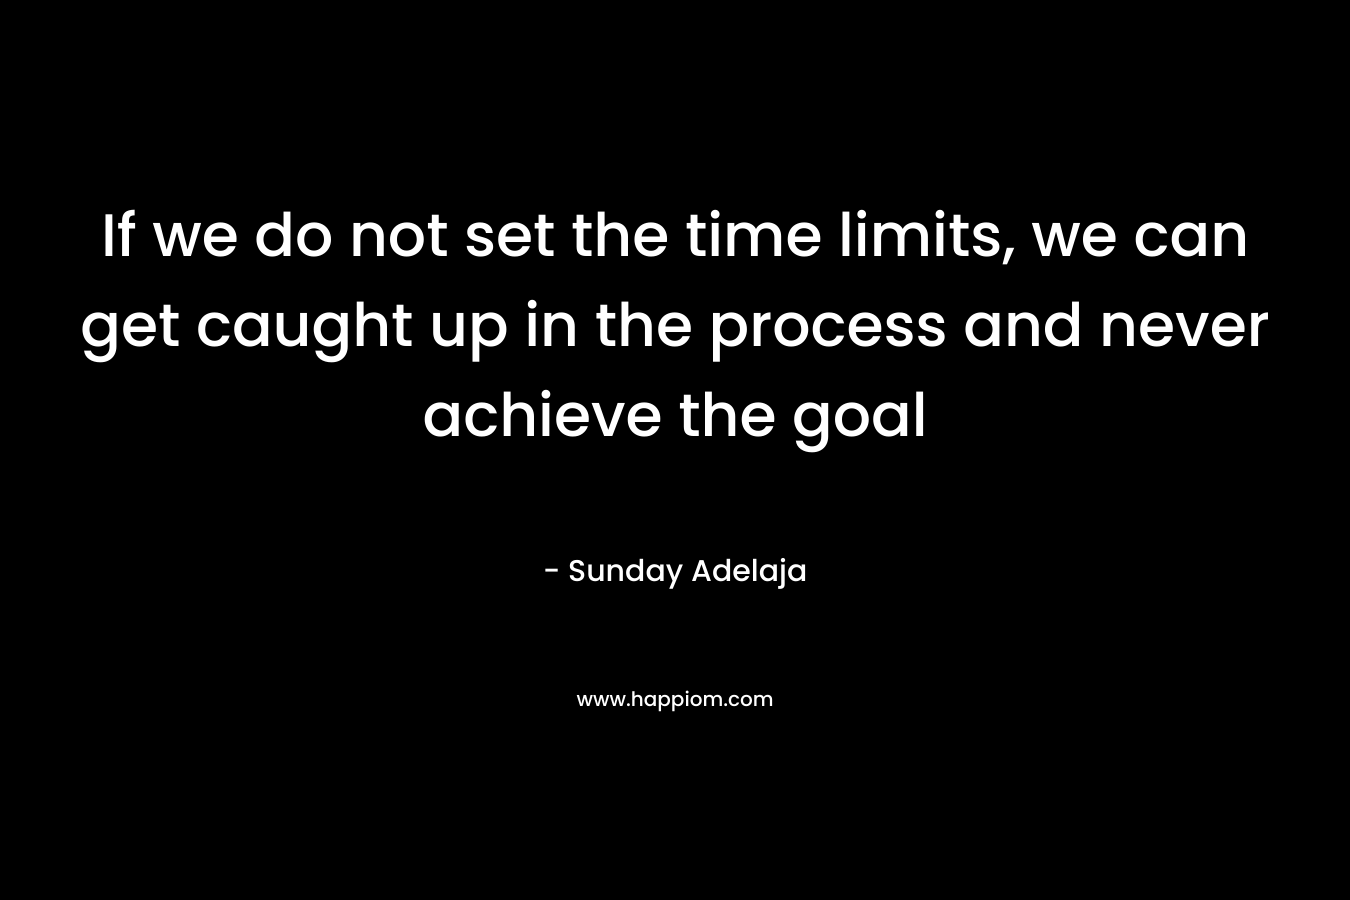 If we do not set the time limits, we can get caught up in the process and never achieve the goal